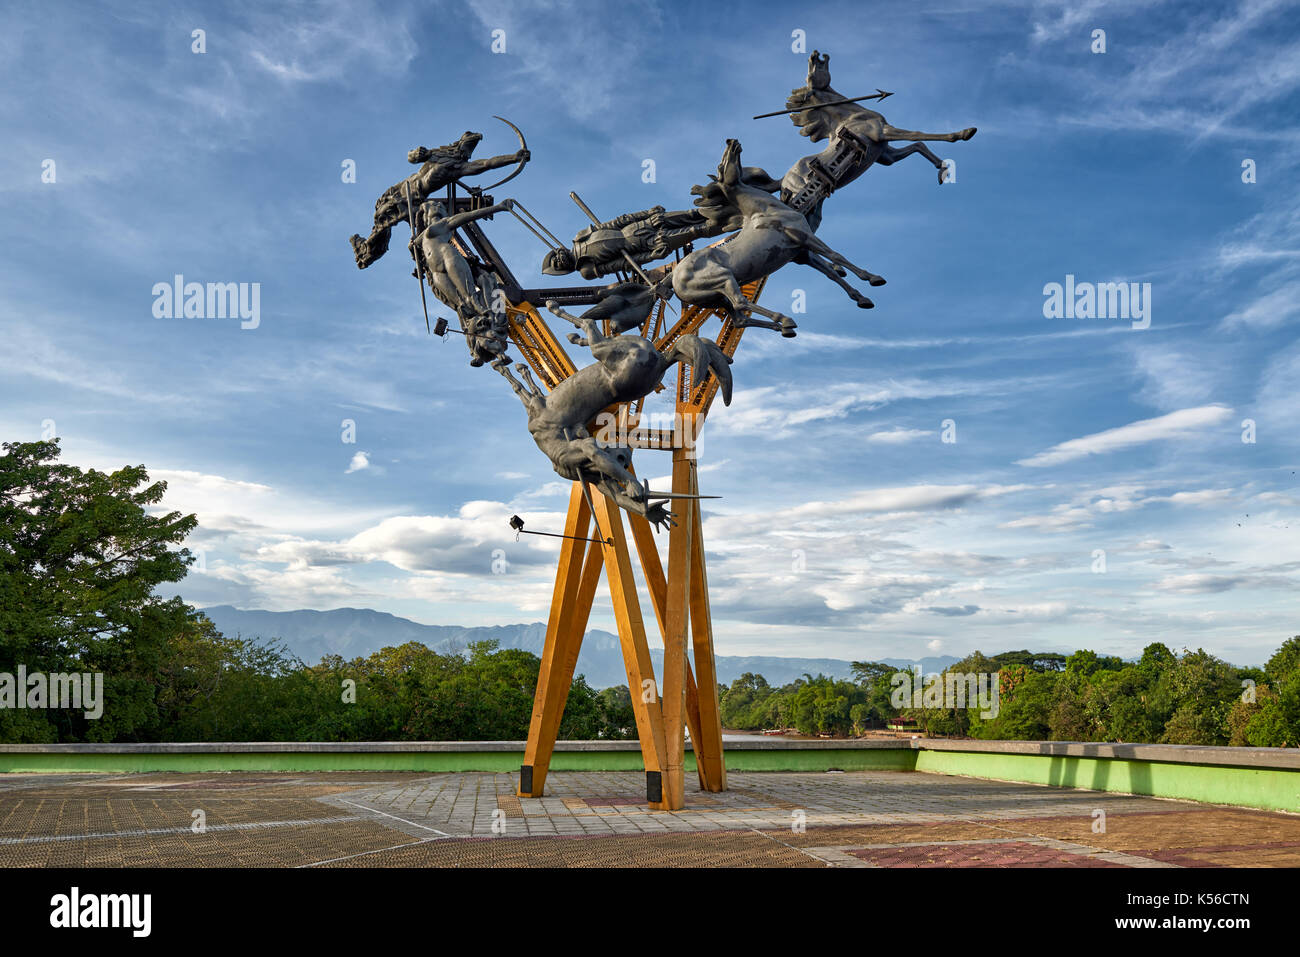 sculpture of La Gaitana in Neiva, indigenous woman who leads the fight and wins against Spanish conquistadores, Colombia, South America Stock Photo